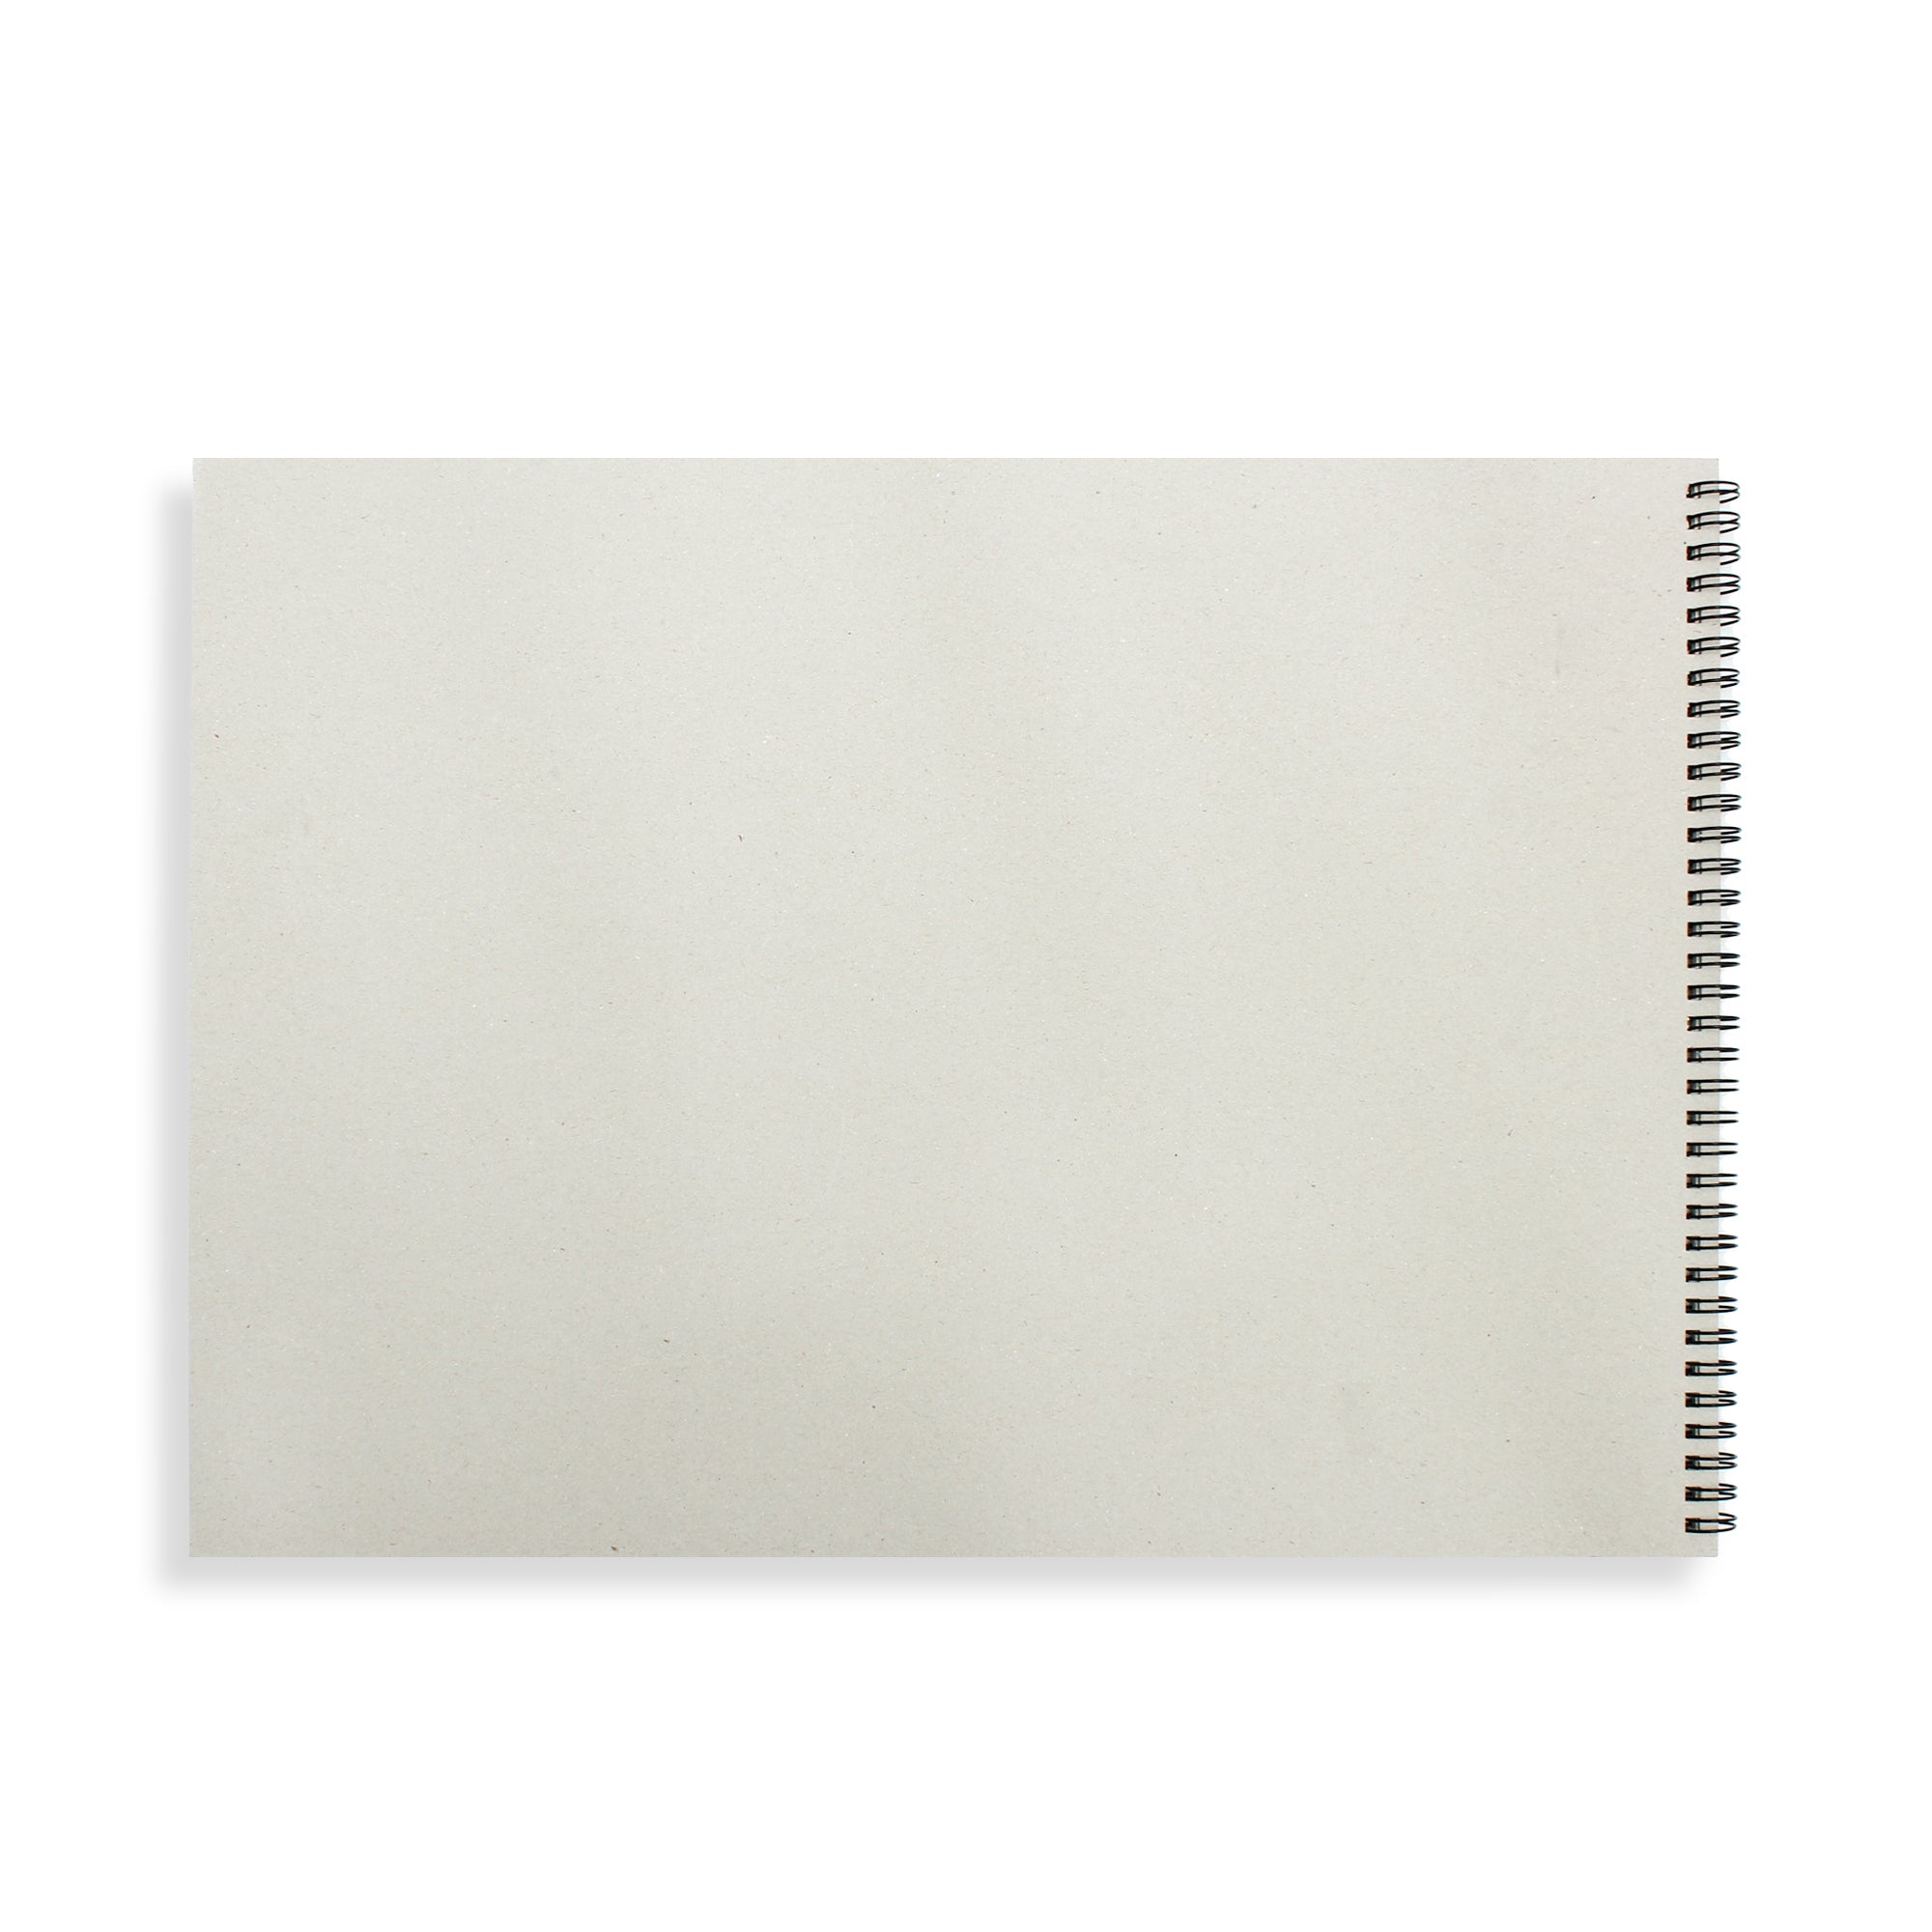 Sketch Book Premium Quality A3 Wire O Binding 150Gsm 20Sheets Lb